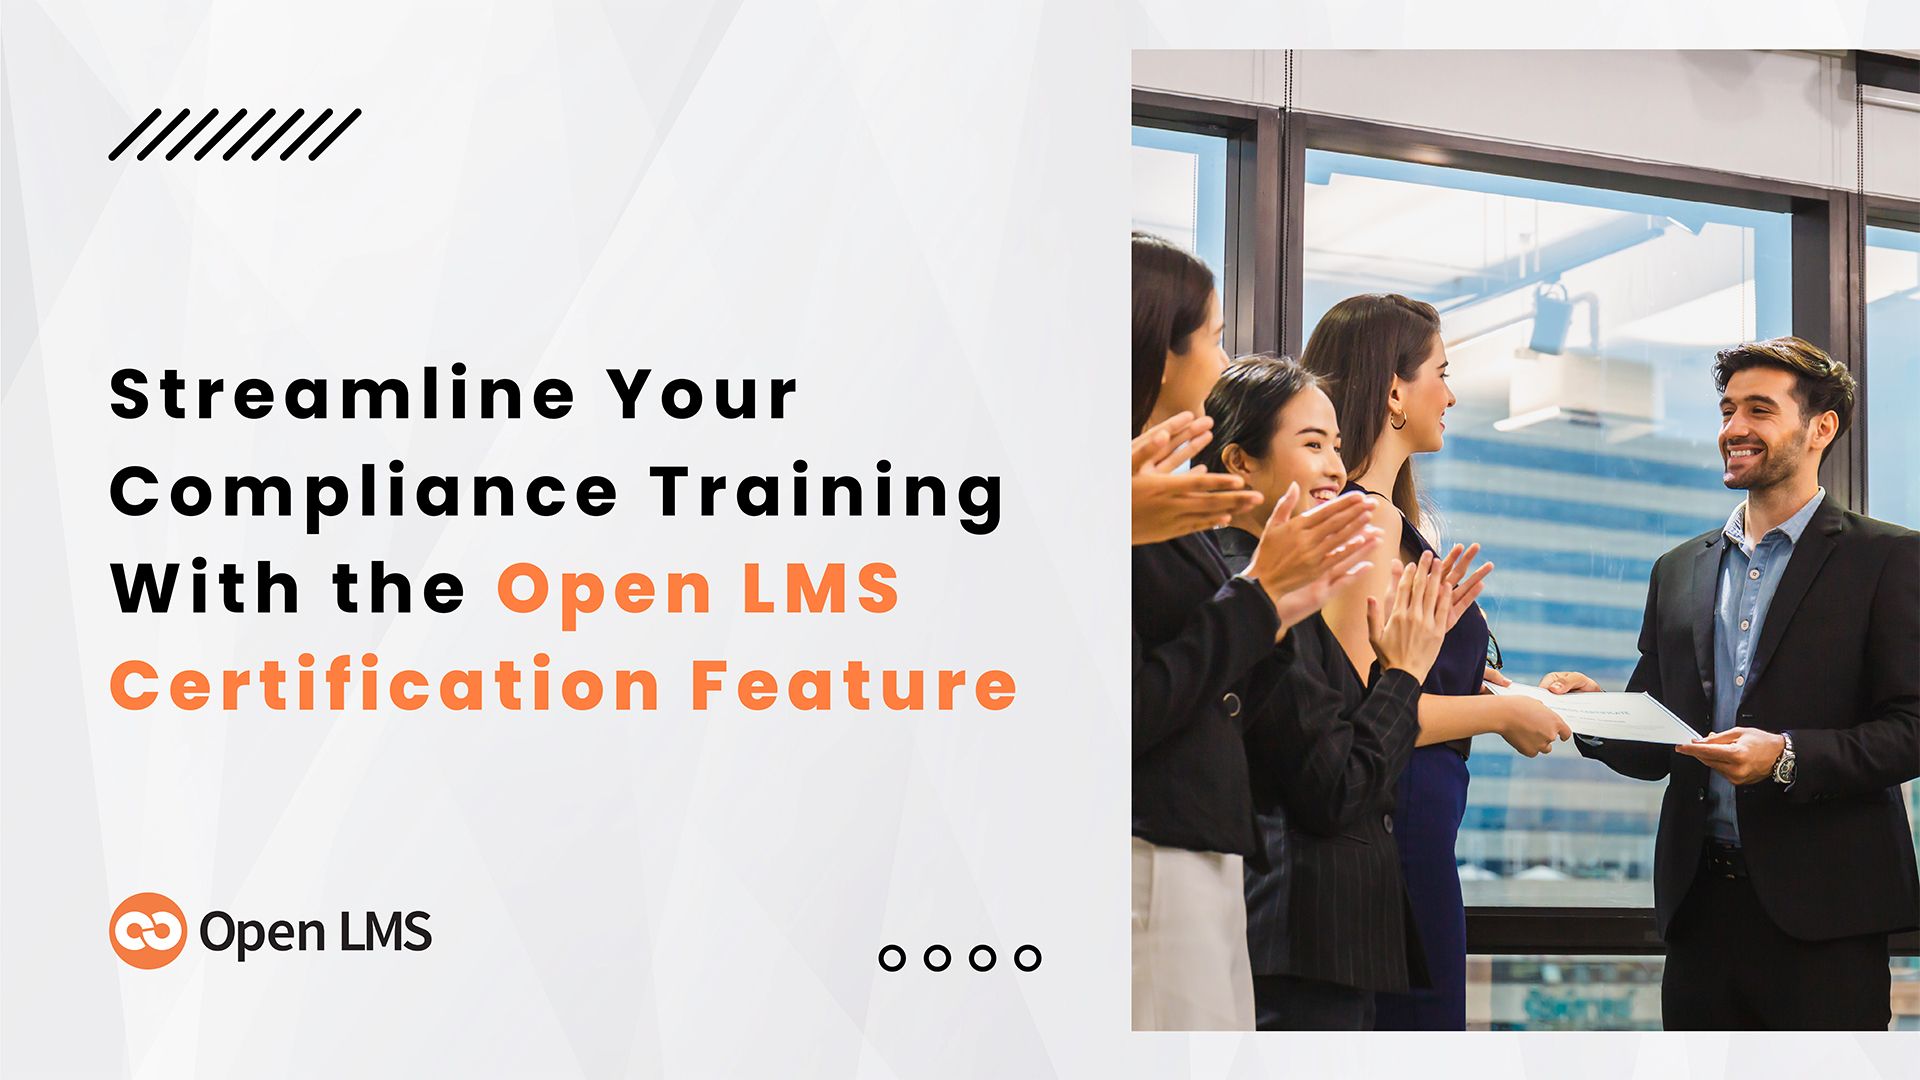 Streamline Your Compliance Training With the Open LMS Certification Feature